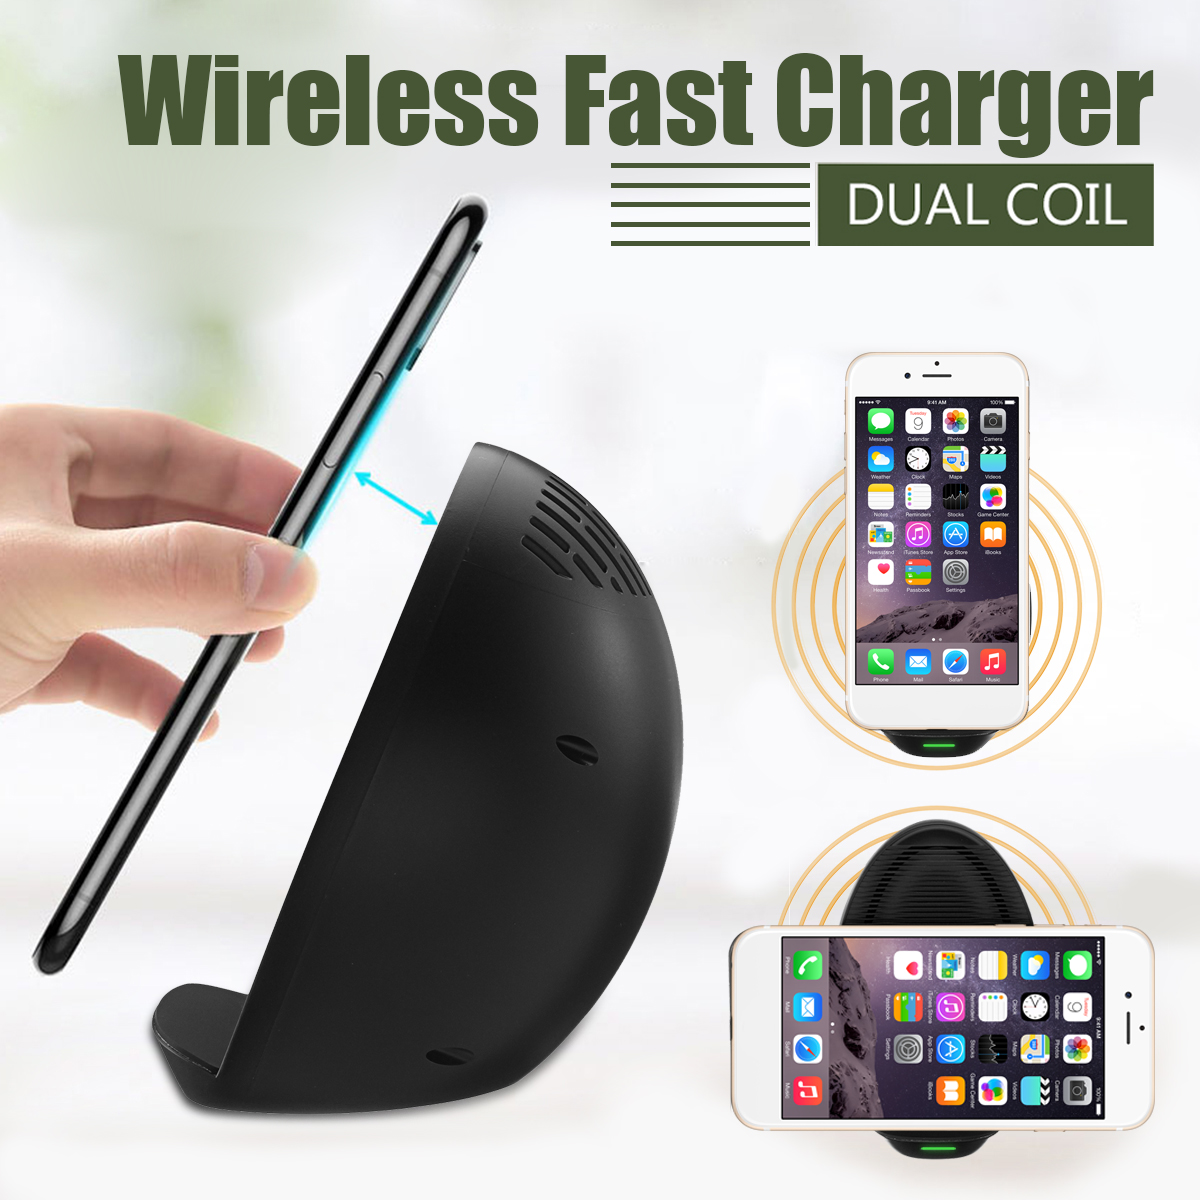 Wireless-Qi-Fast-Stand-Charger-Dual-Coil-With-Fan-For-Samsung-S8-iPhone-8-Plus-X-1264550-1